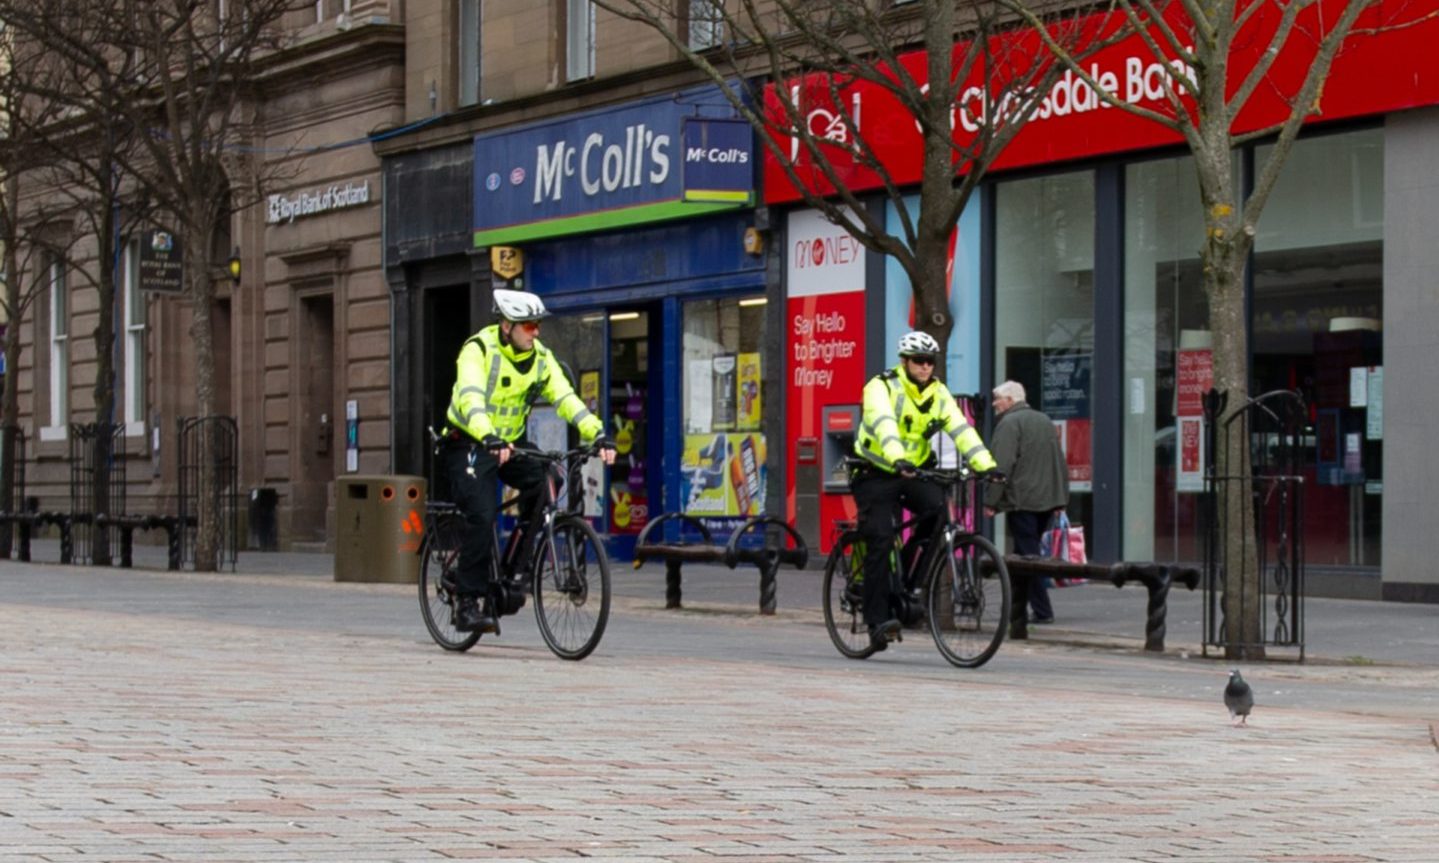 Police on patrol in Dundee city centre.